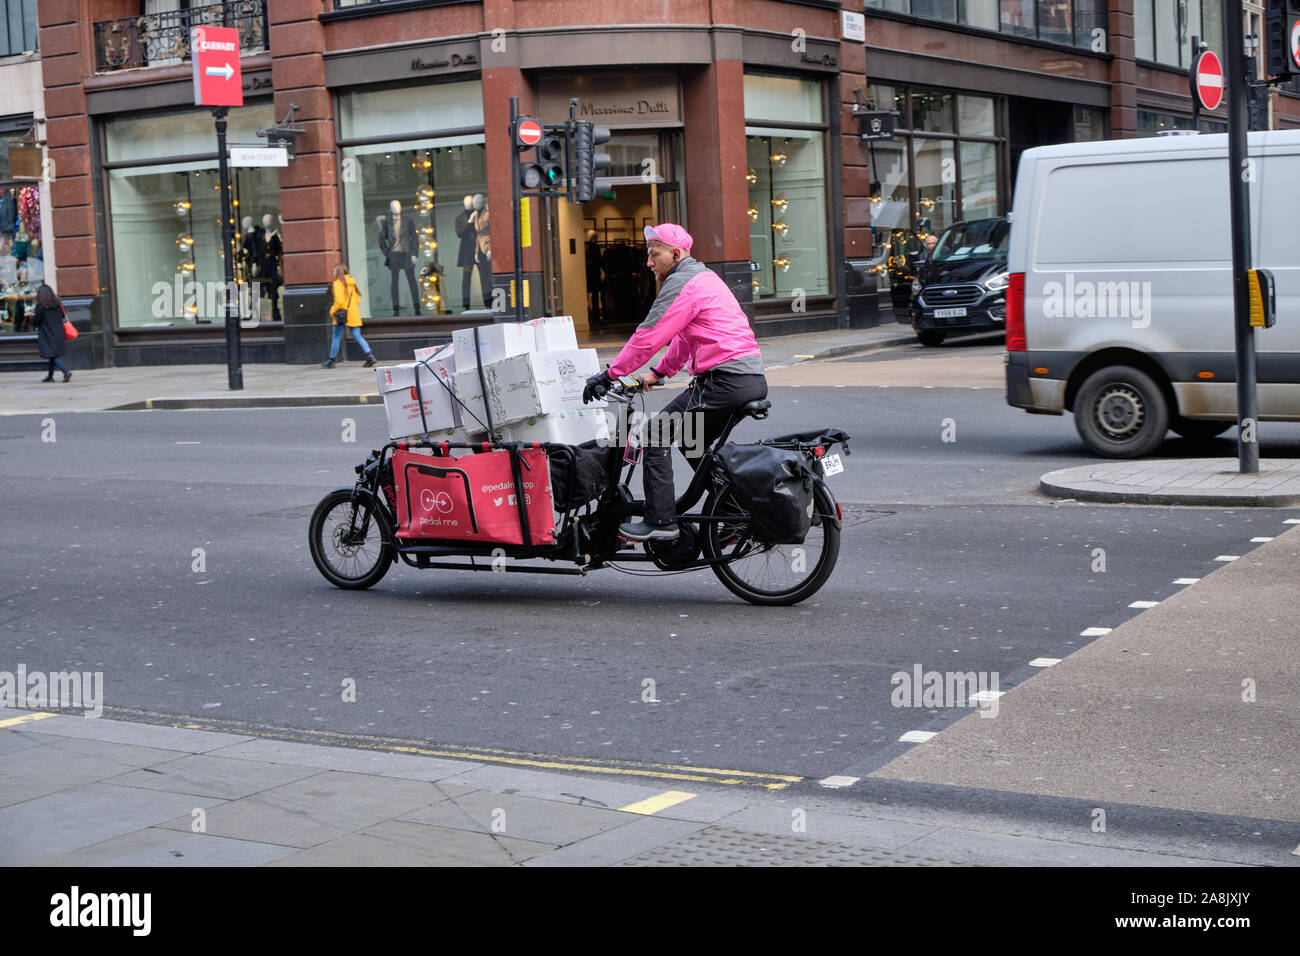 Pedal Me cargo bike delivery service, loaded with multiple boxes riding on Regent Street, London, UK. Stock Photo